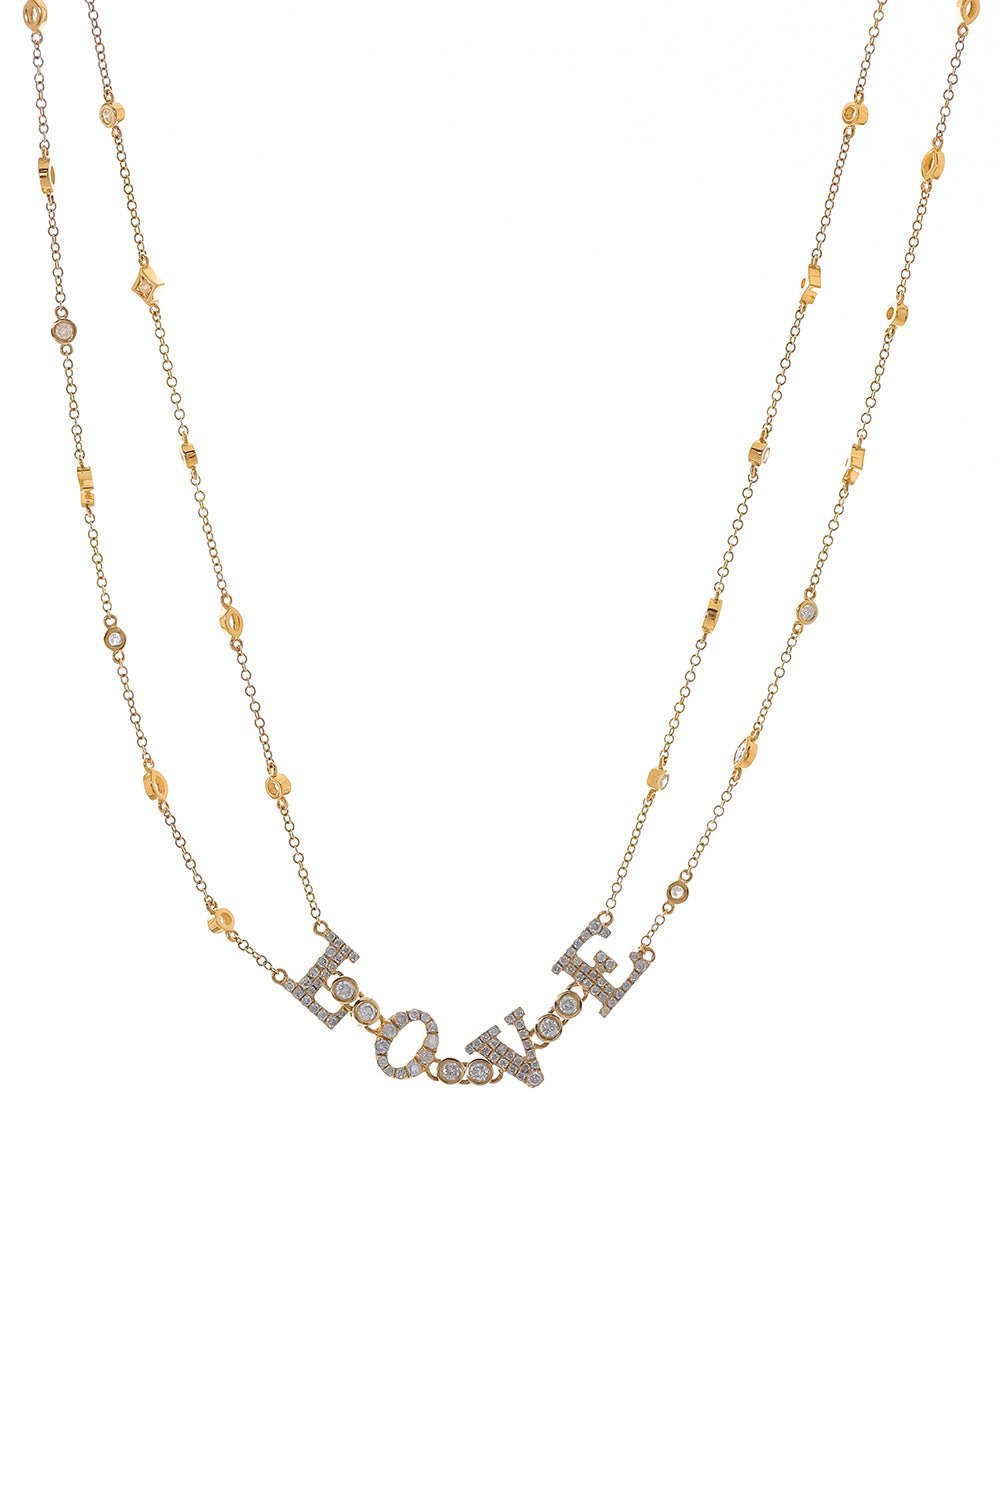 LOREE RODKIN-Double Chain Love Necklace-YELLOW GOLD